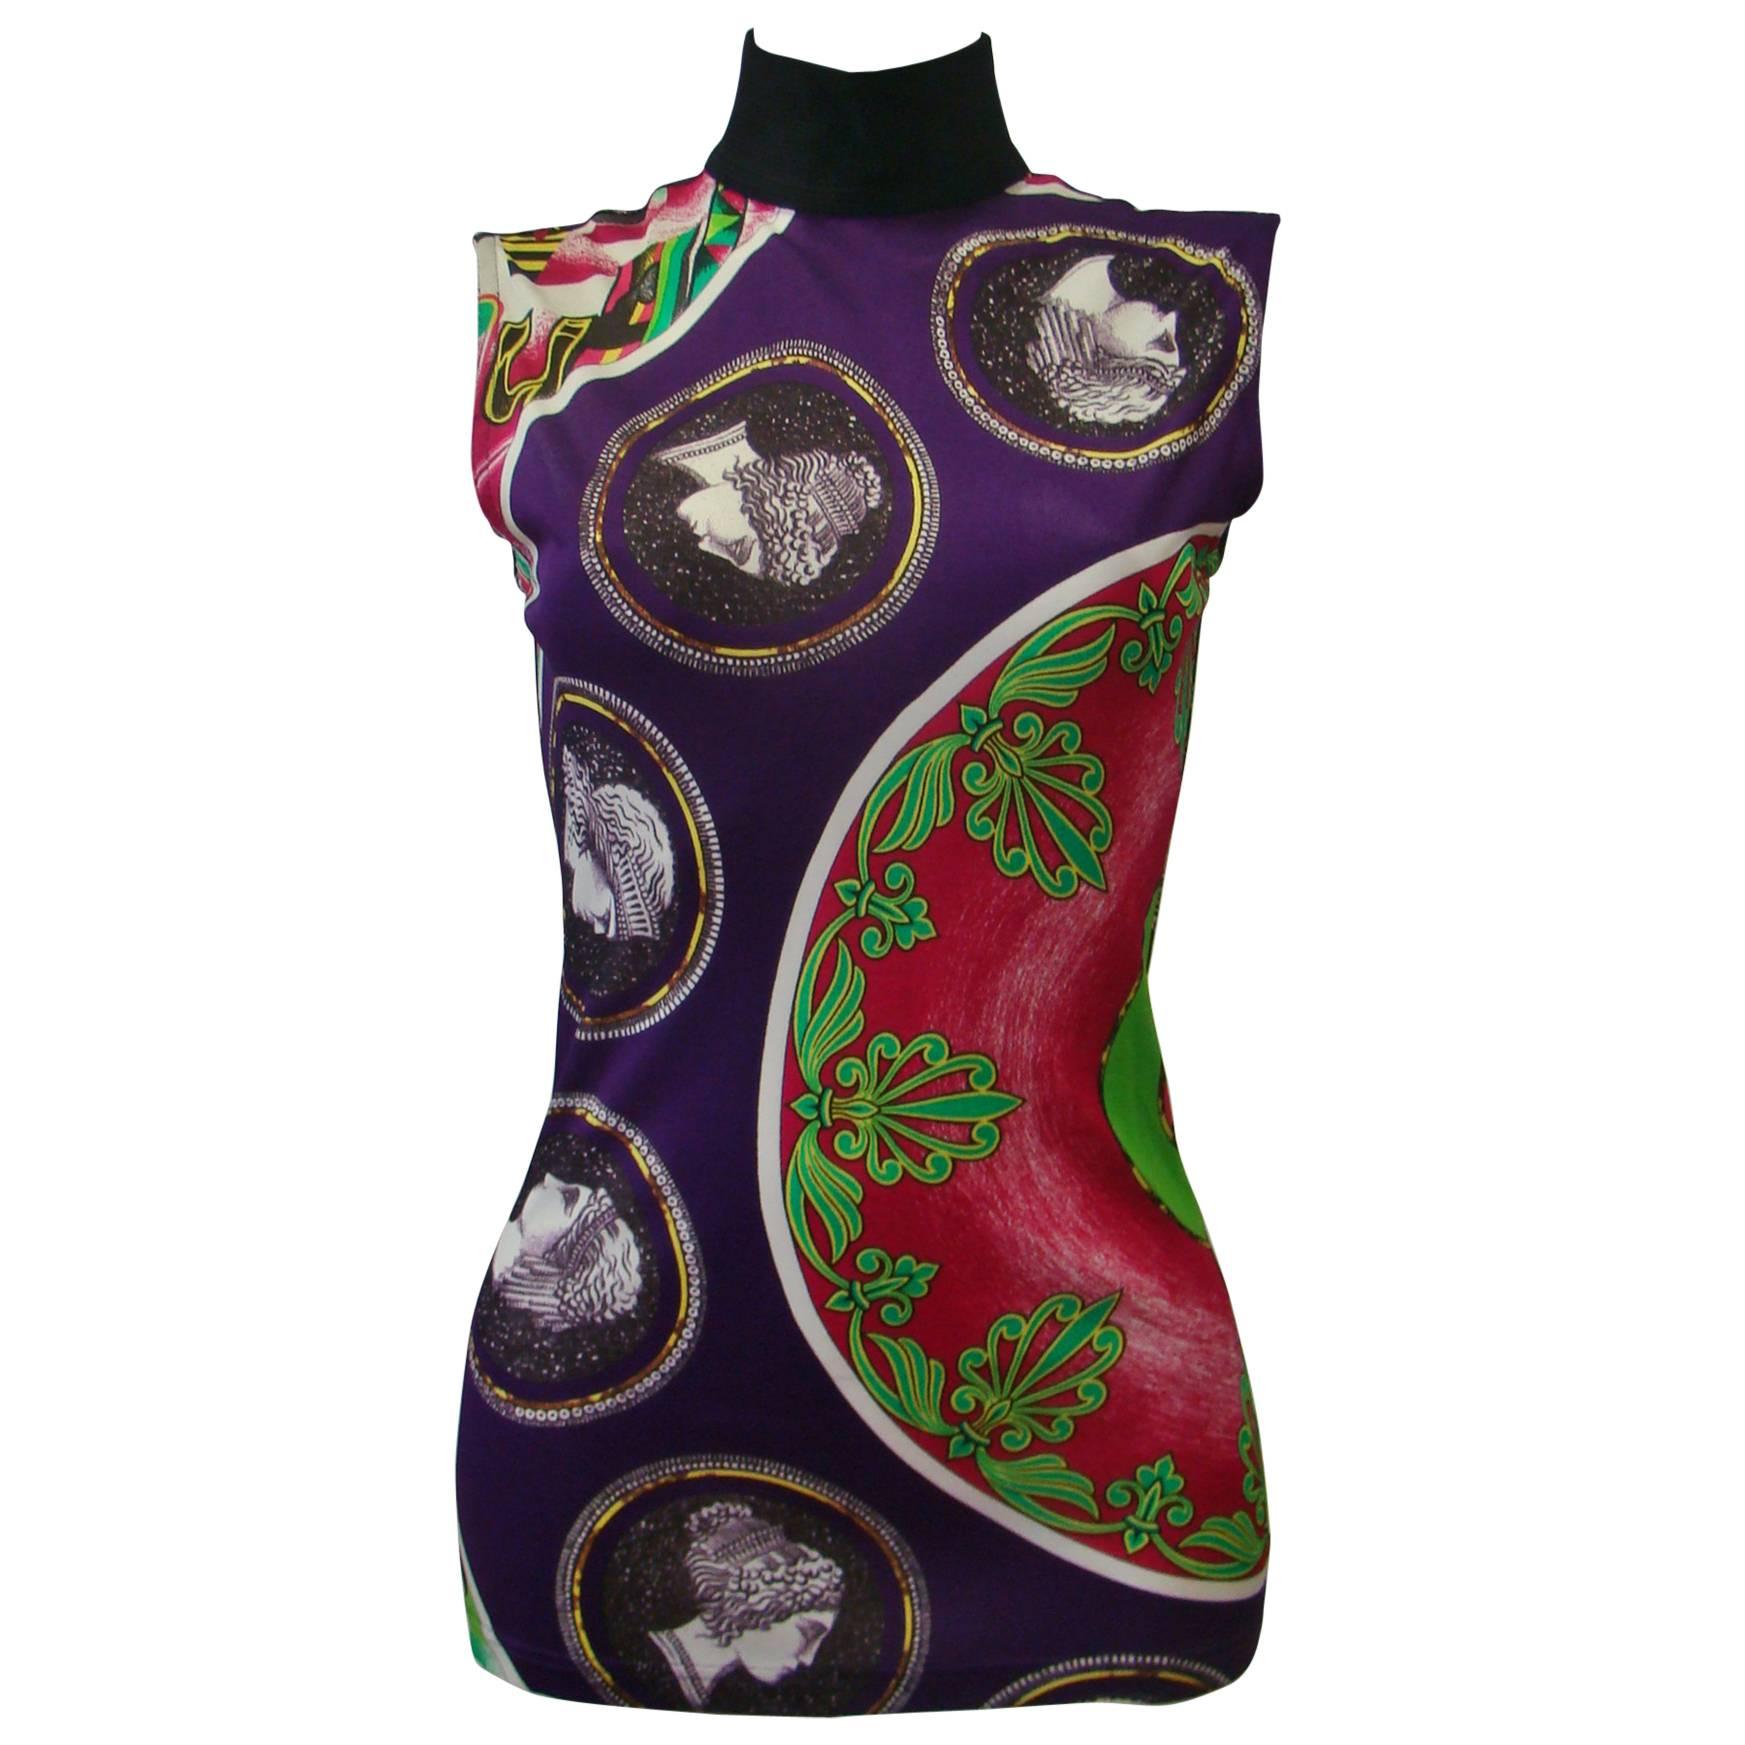 Gianni Versace Silk Printed Top Spring 1991 For Sale